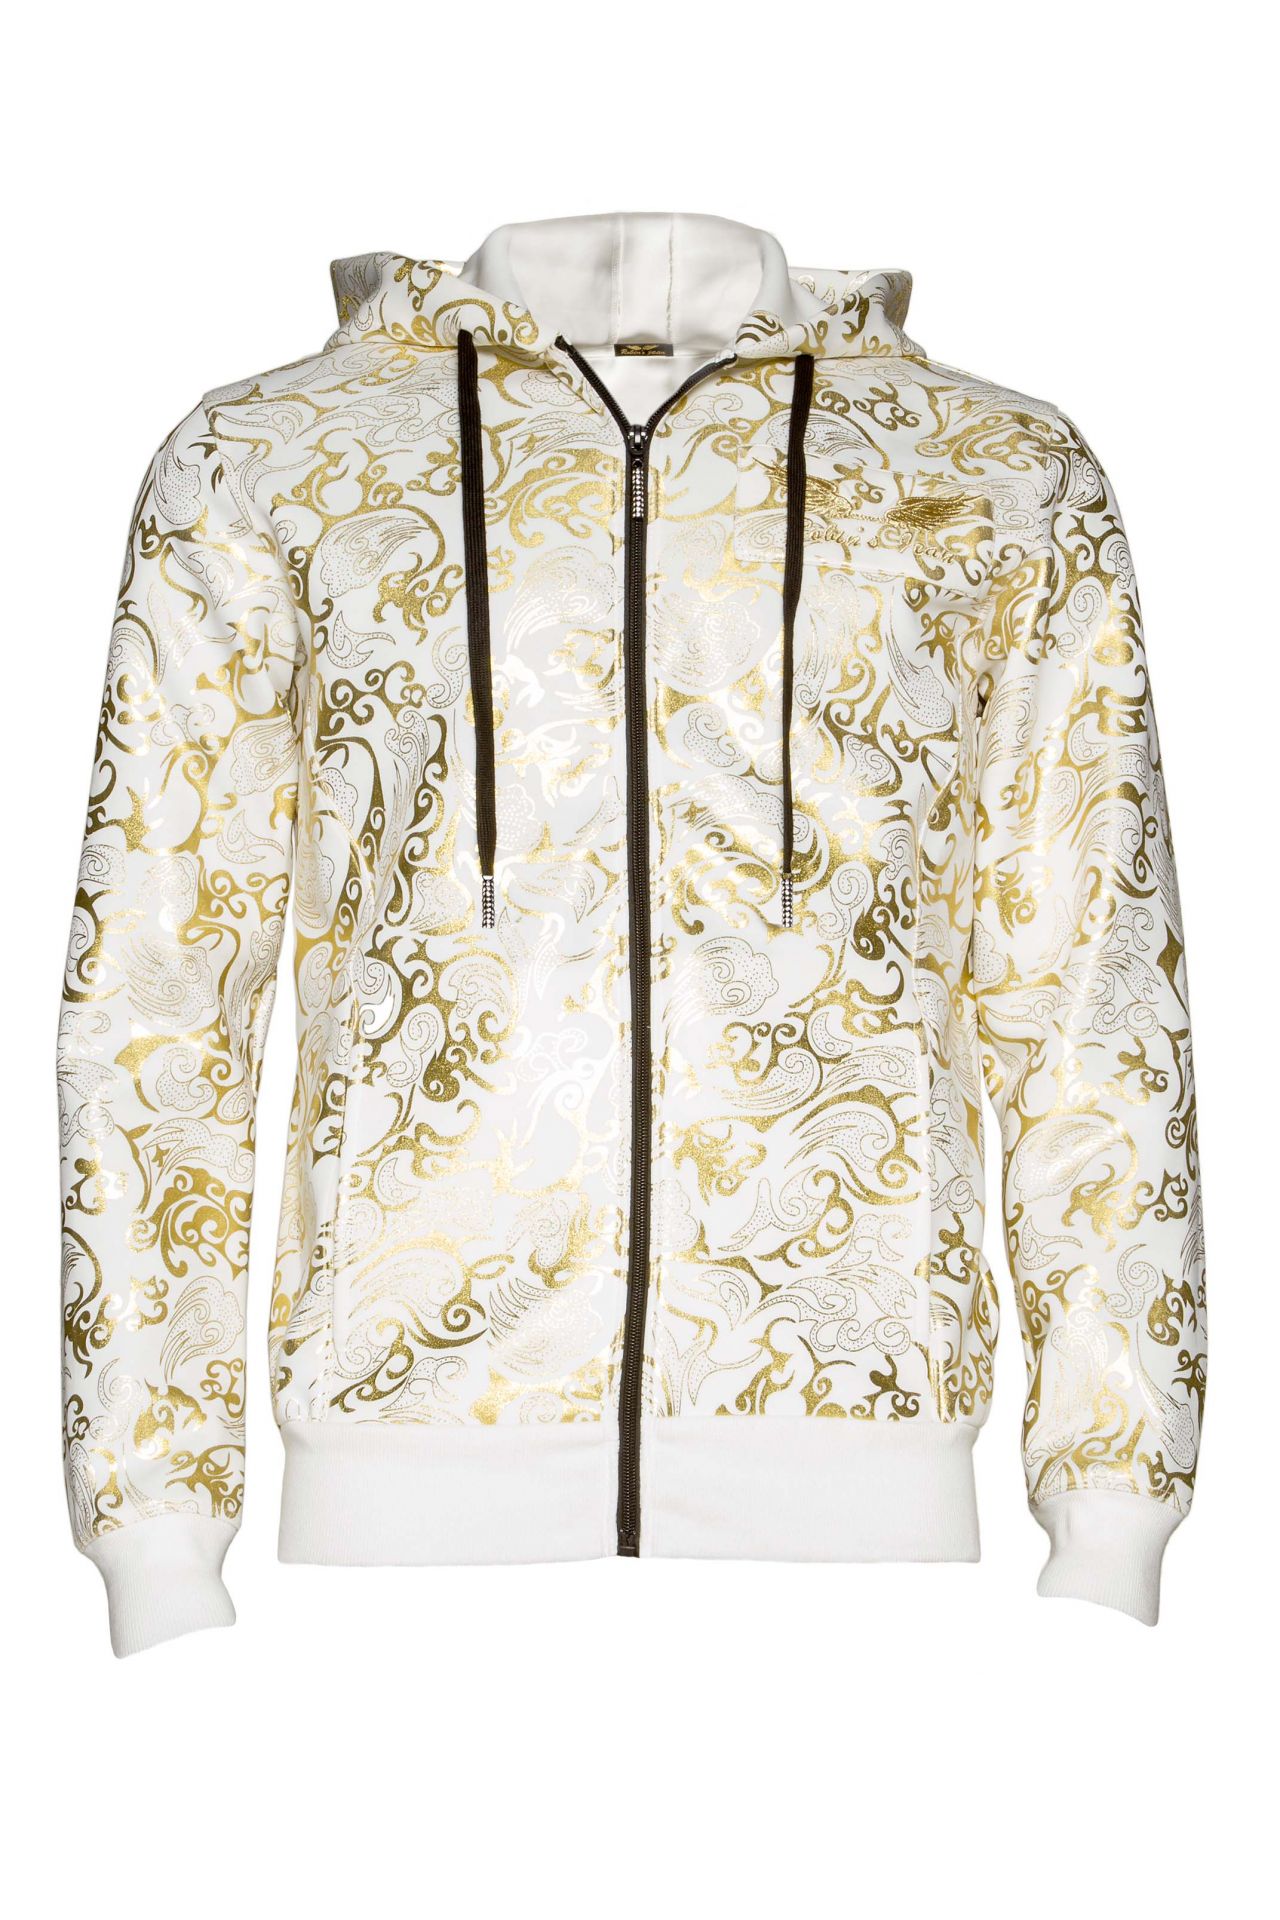 CLOUDS TRACK JACKET HOODIE IN WHITE AND GOLD